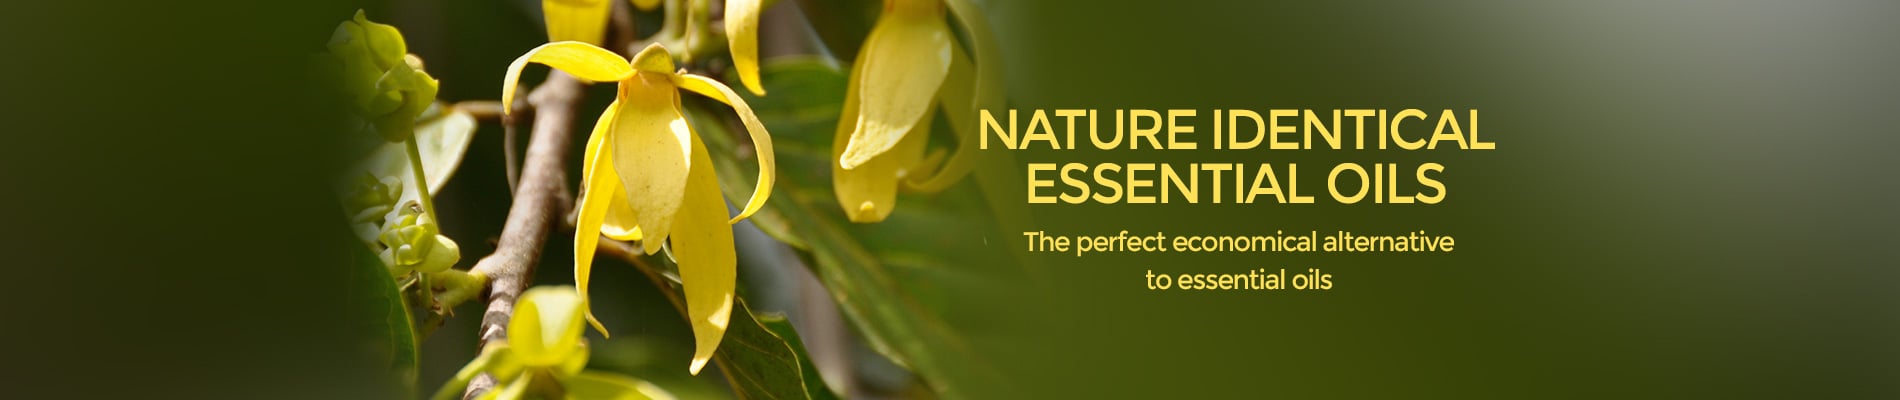 yellow plant for nature identical essential oils